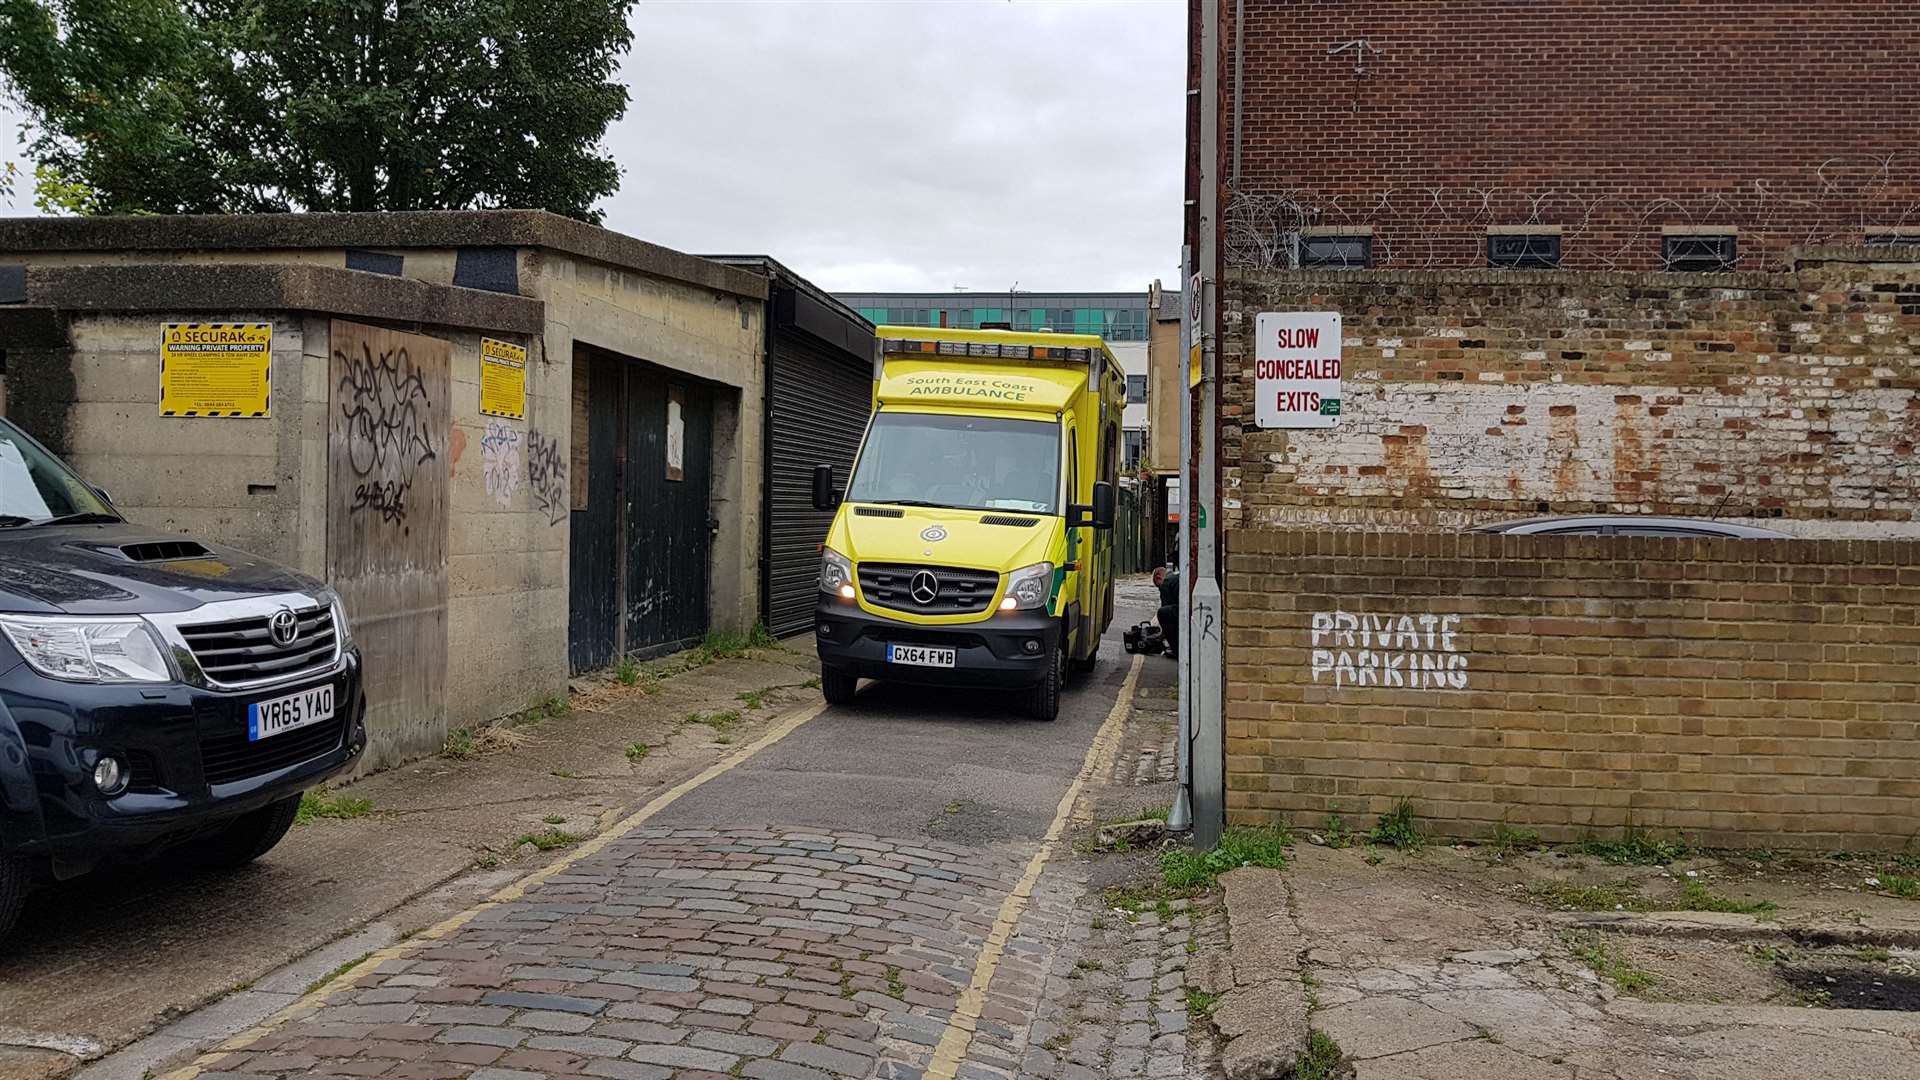 An ambulance was also parked in nearby East Crescent Road